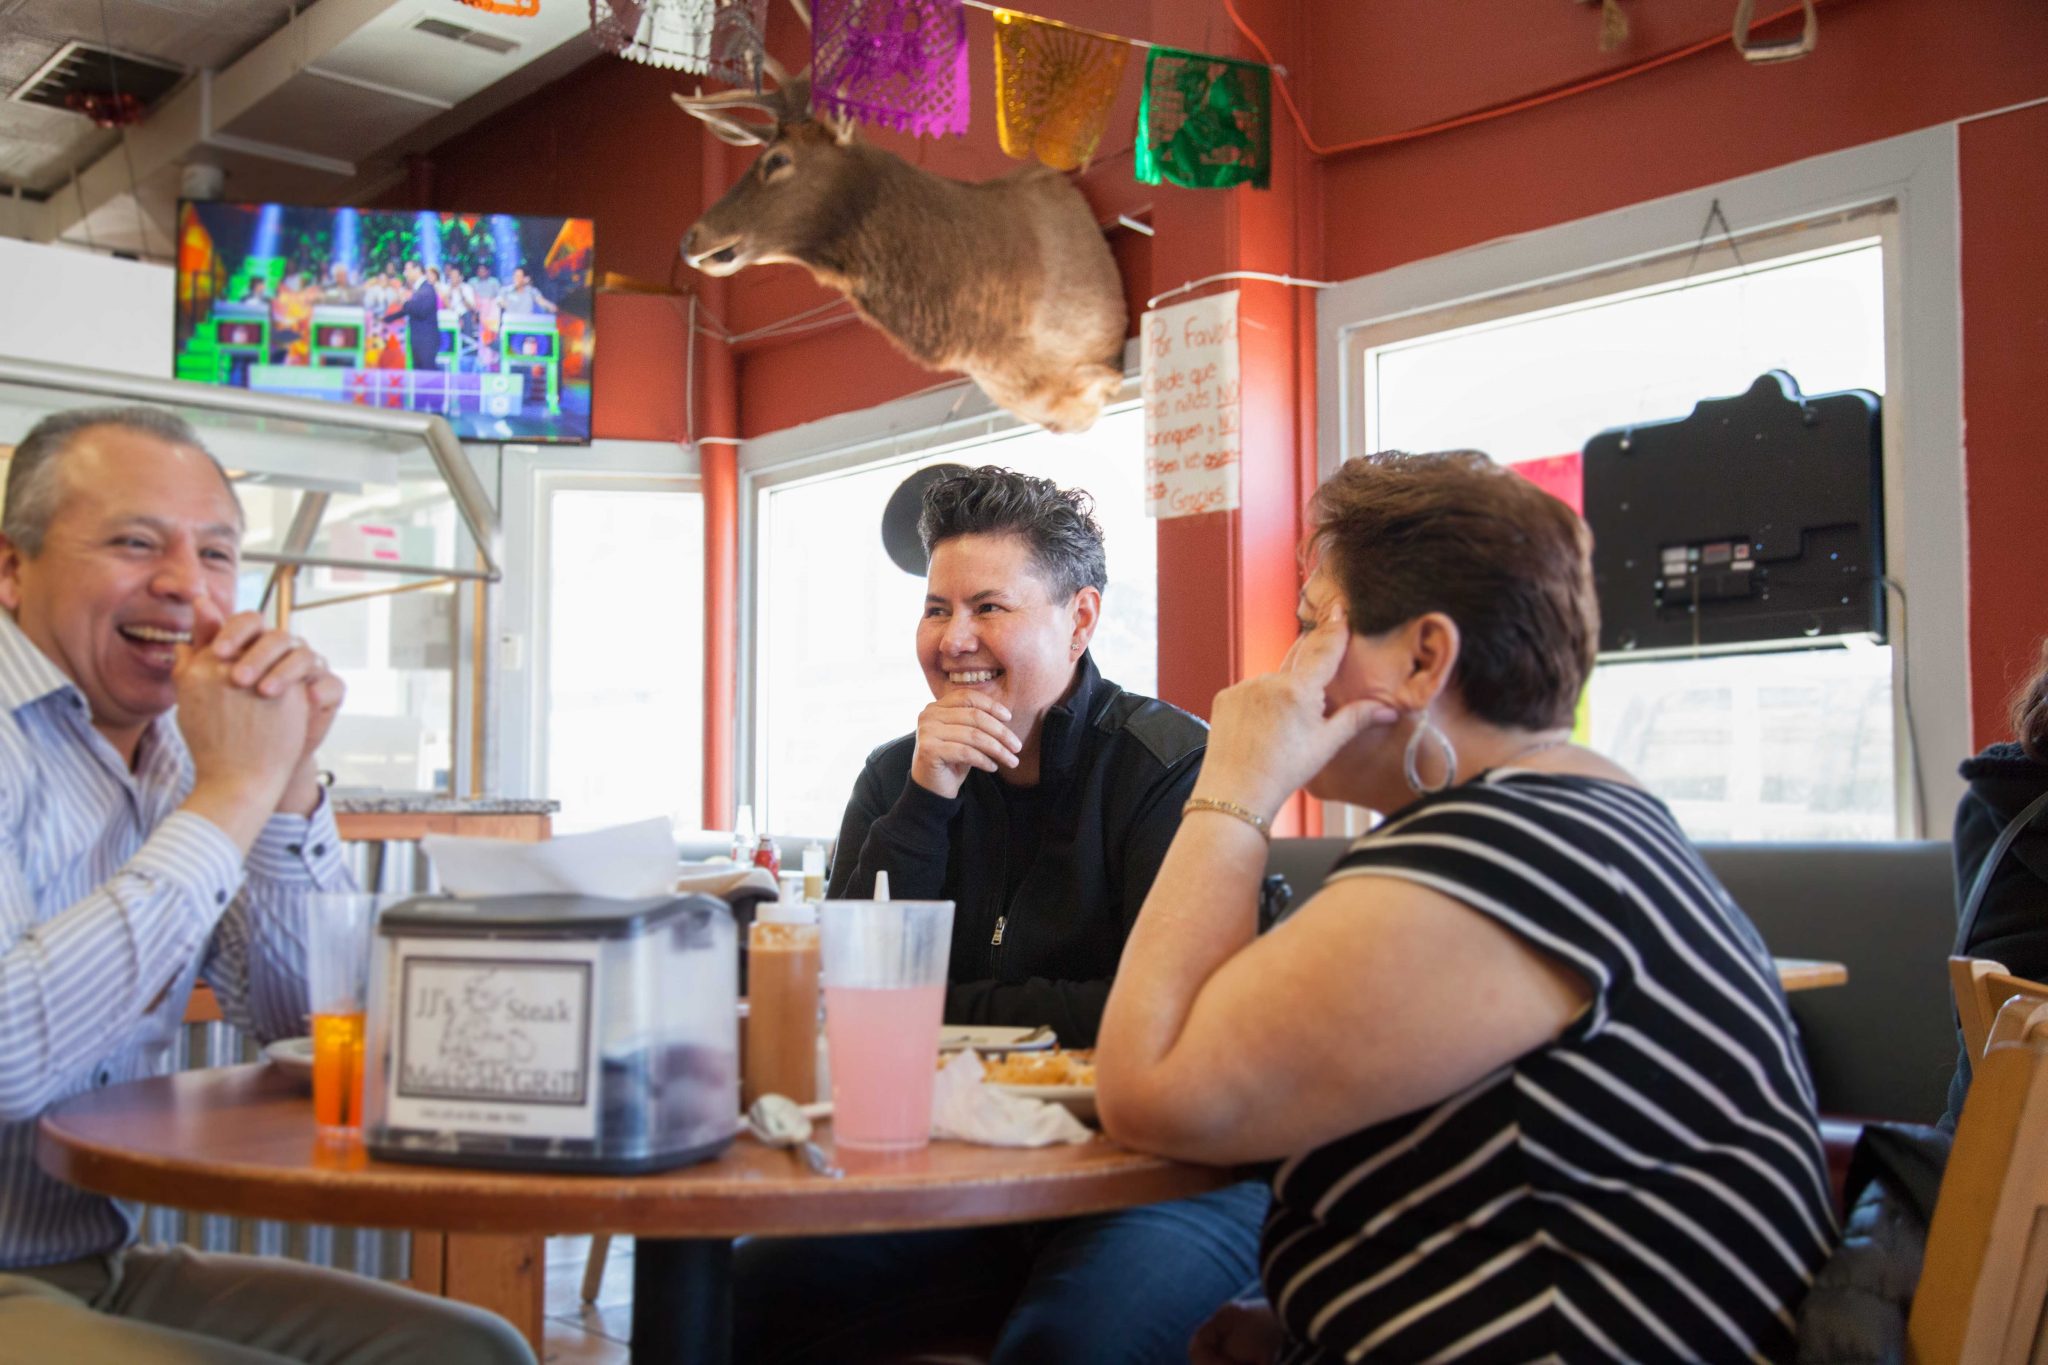 Plaza Del Sol owner Sonia Ortega (center) sits down to chat with customers.